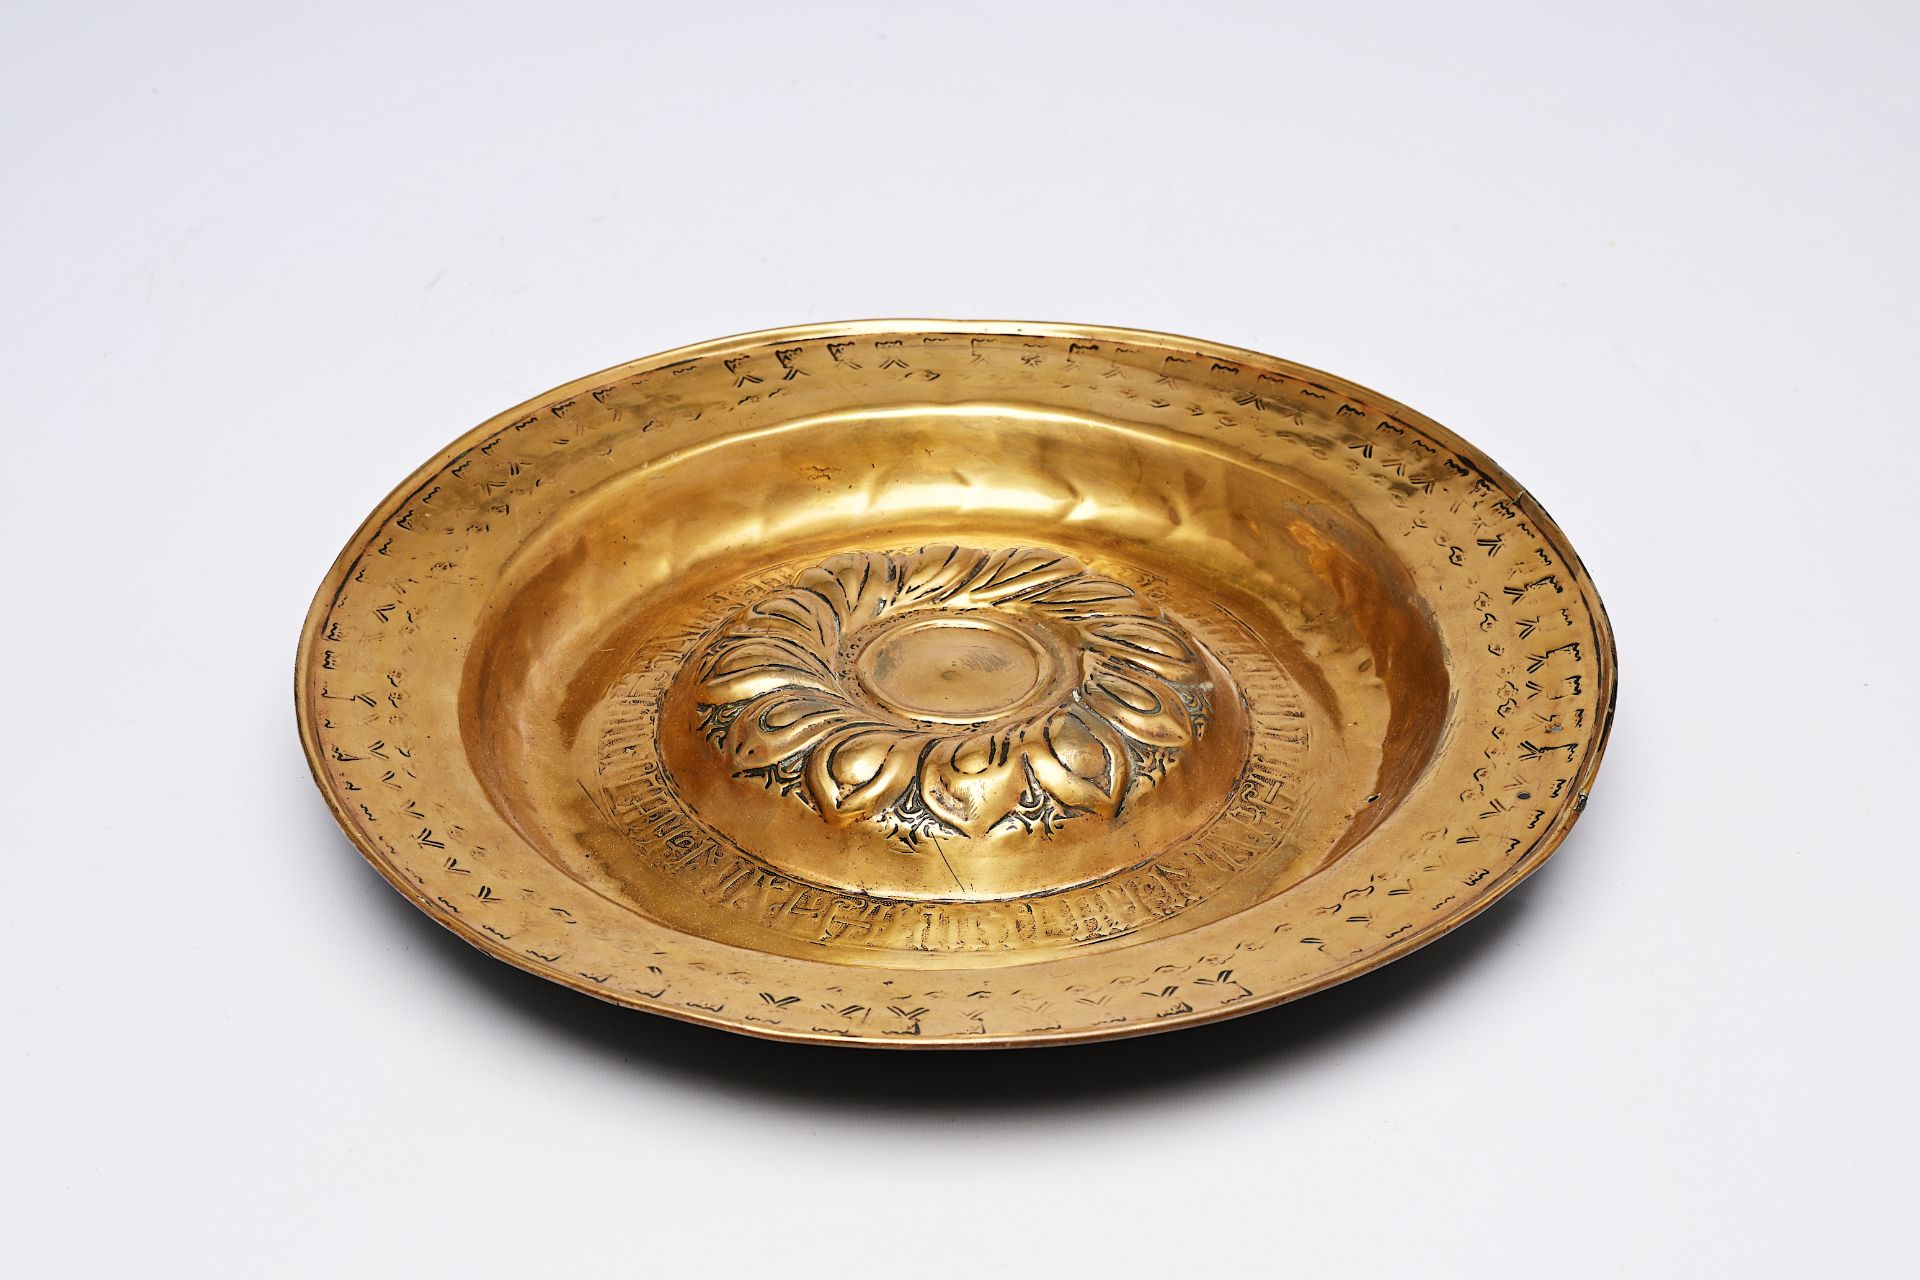 A large brass alms dish, probably Nuremberg, Germany, 16th/17th C. - Image 3 of 4